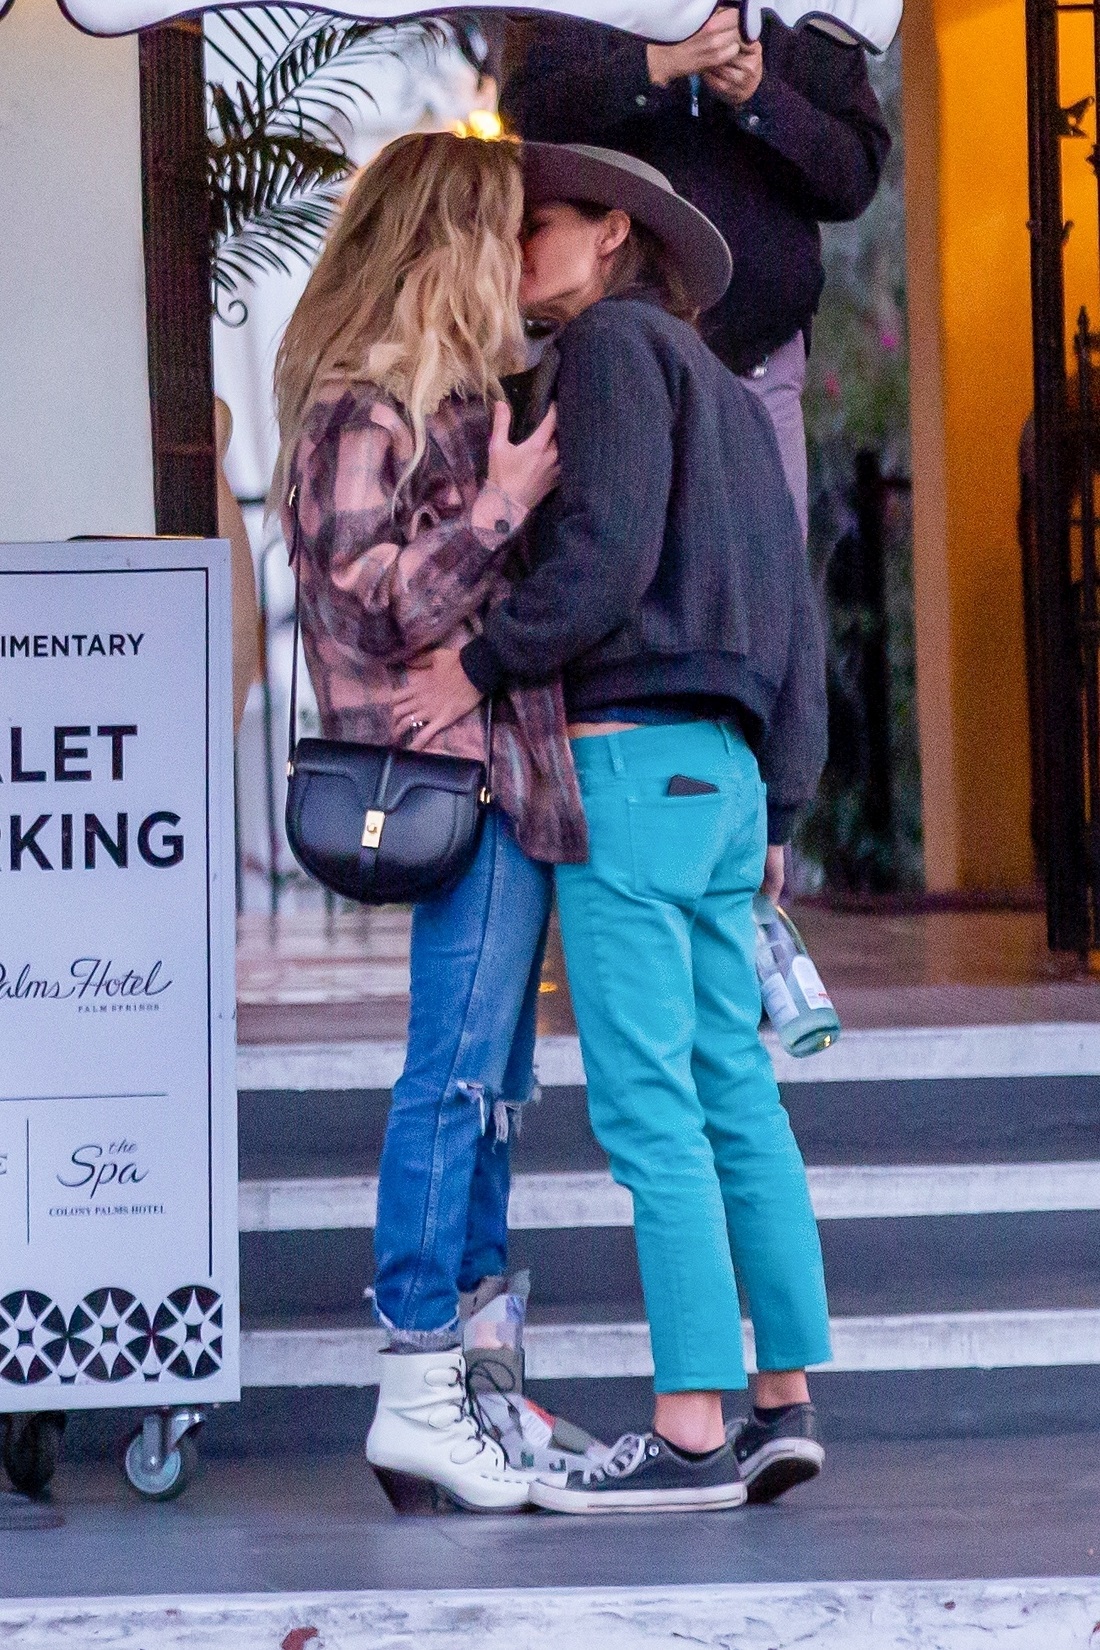 Palm Springs, CA  - *PREMIUM-EXCLUSIVE*  - *WEB EMBARGO UNTIL 7:30 PM EST on January 14, 2020* Actress Amber Heard seen spending a romantic weekend with  Bianca Butti. The 